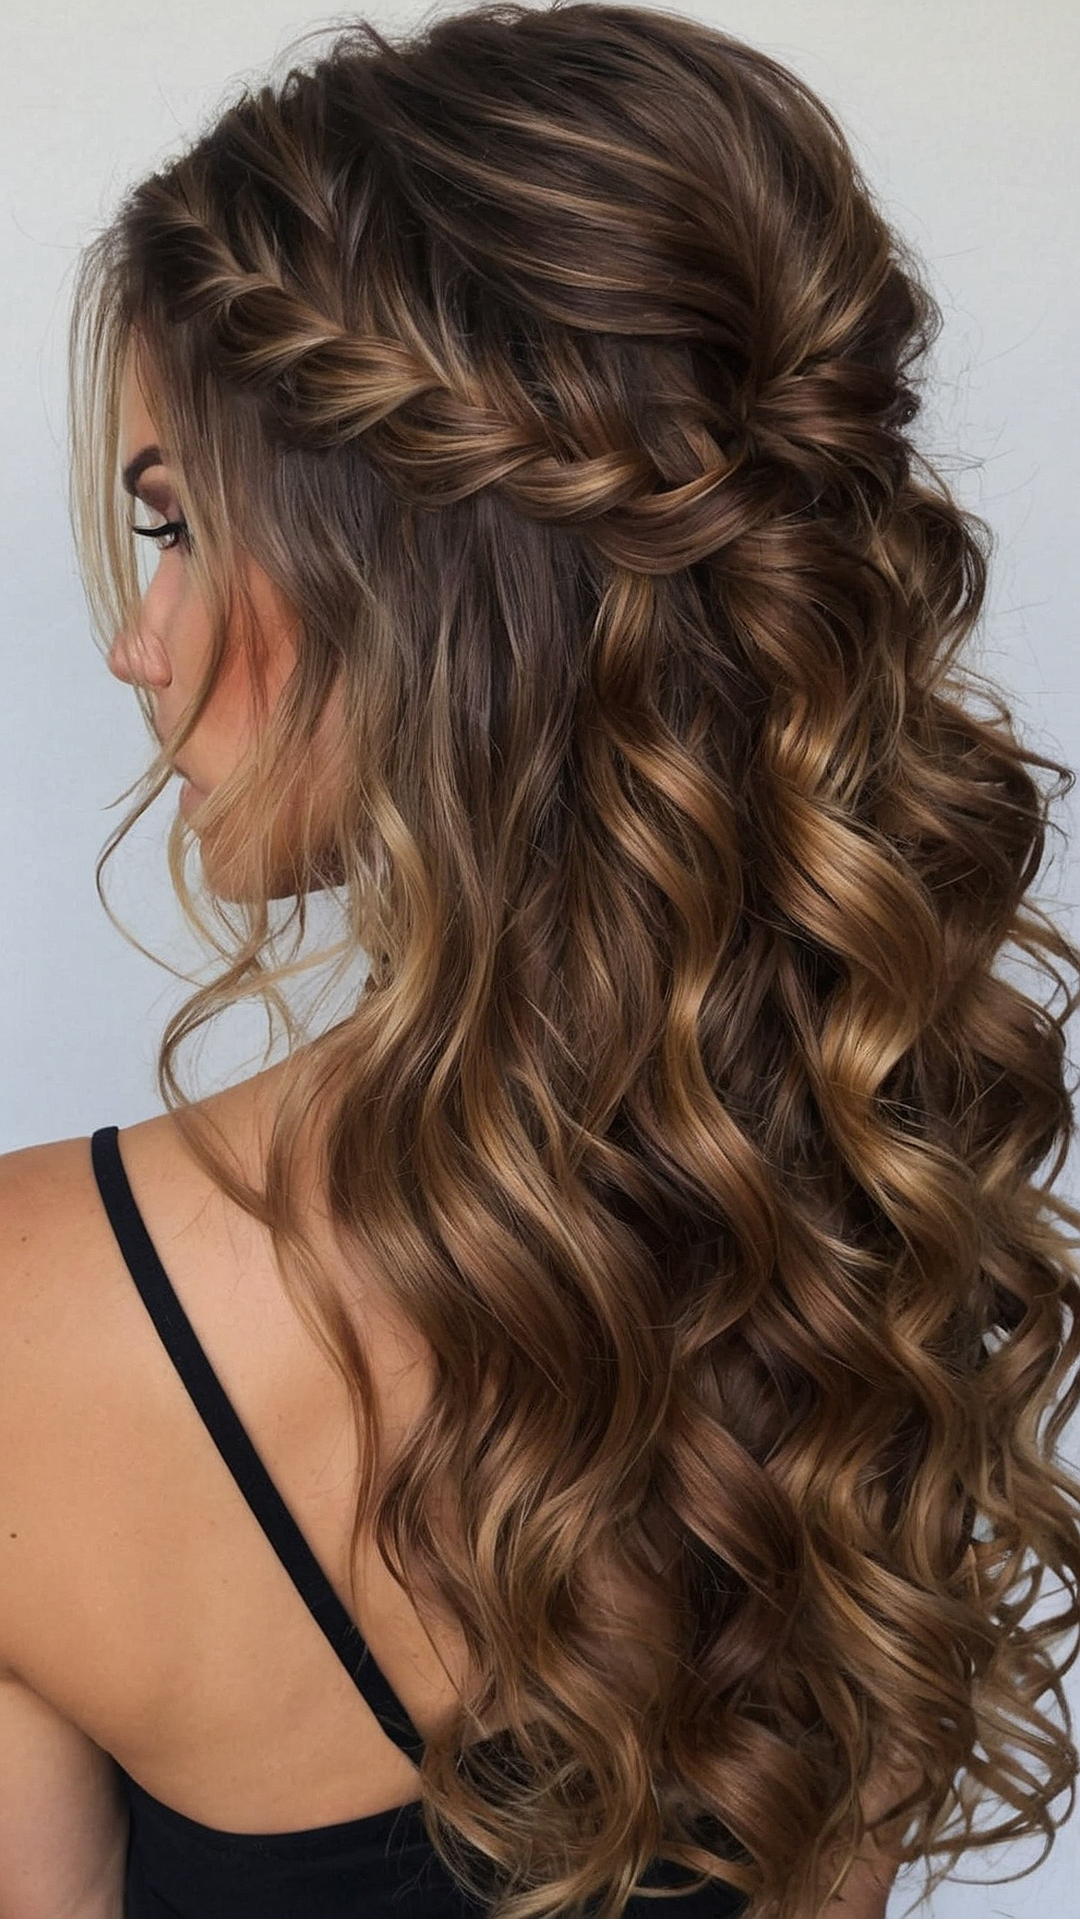 Waves of Inspiration: Wavy Hair Style Gallery